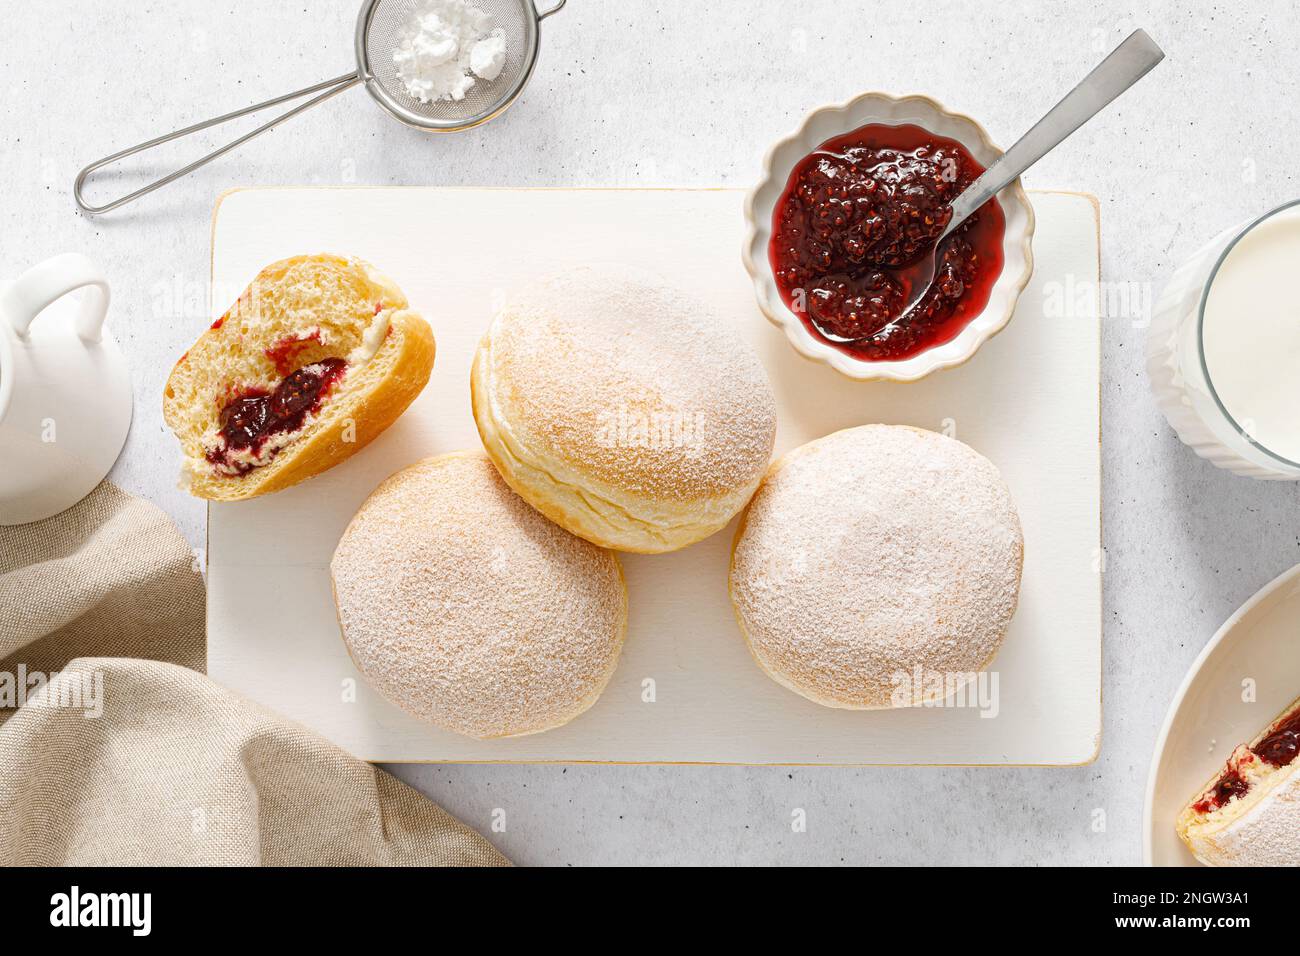 Berliner donut. Traditional german donut with raspberry jam, dusted with icing sugar. Top view Stock Photo